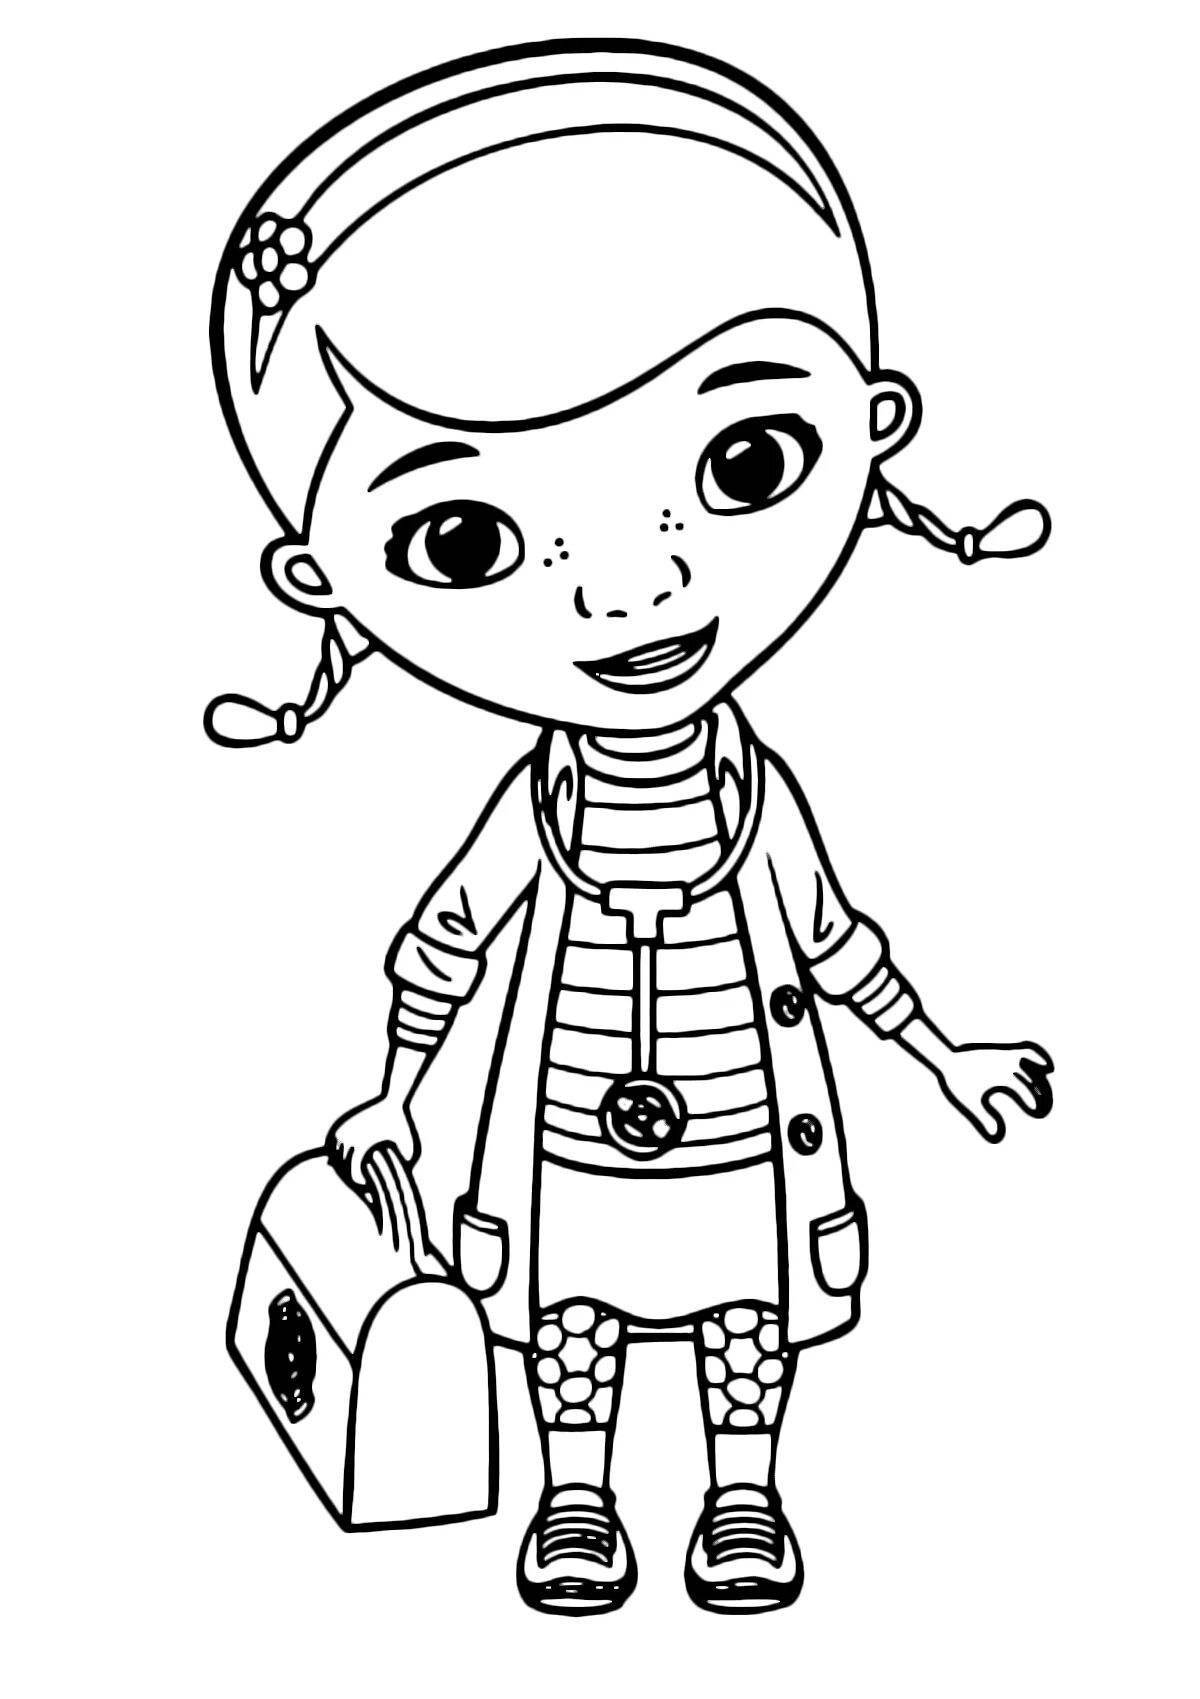 Creative doctor plush coloring book for kids